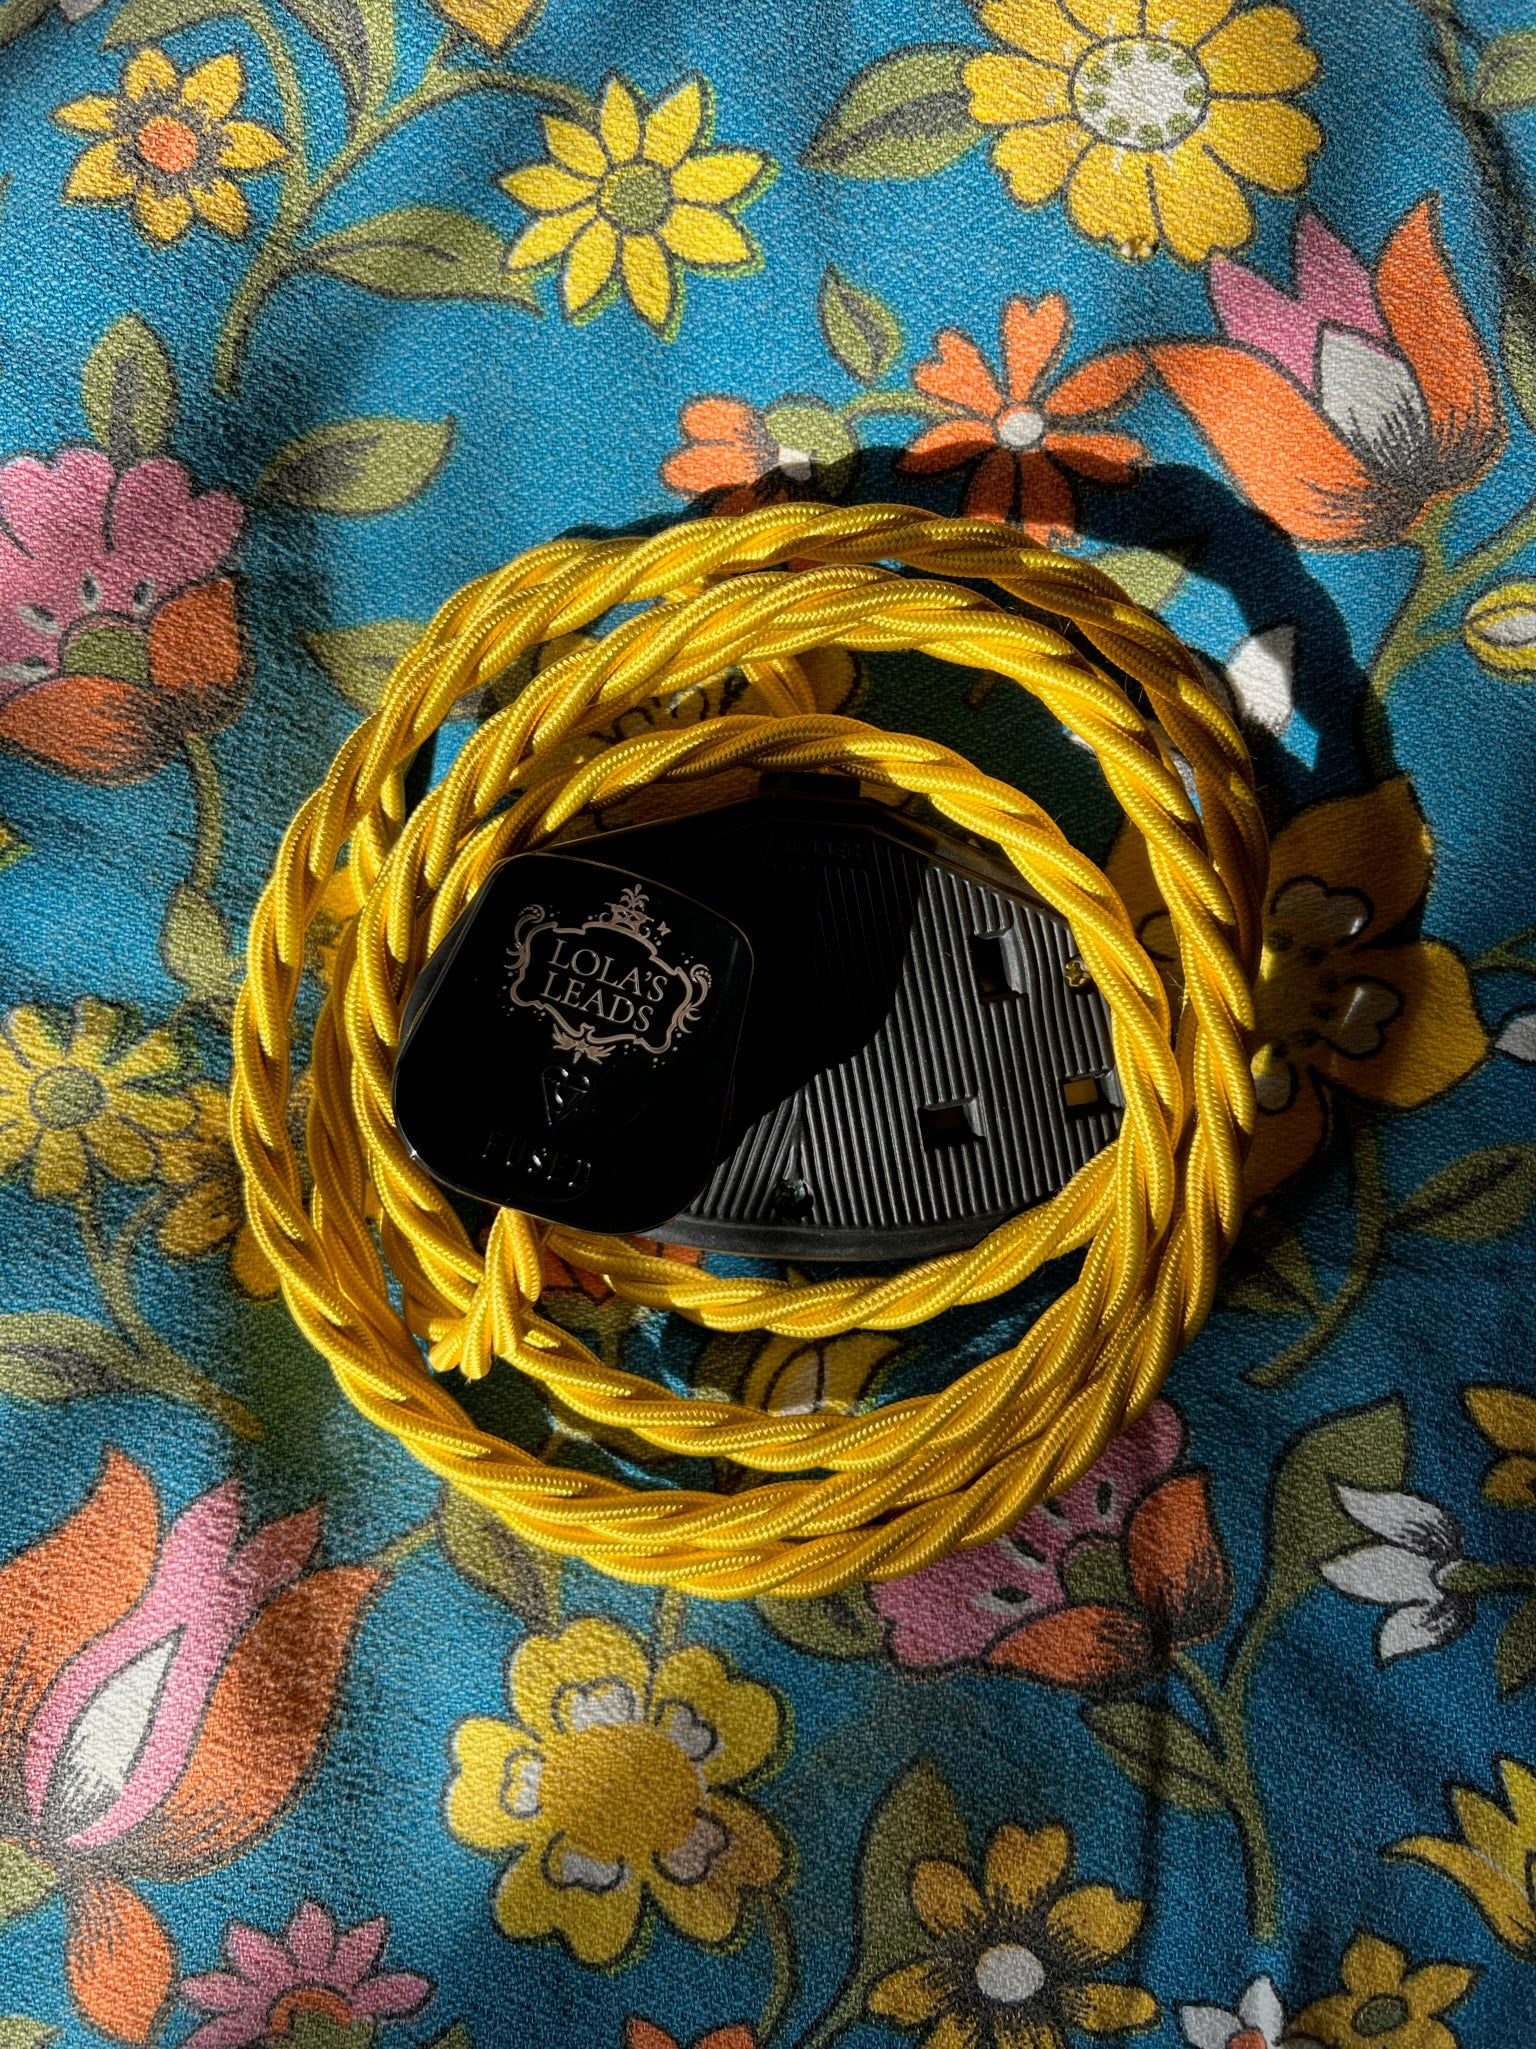 Lola's Leads Buttercup Yellow Fabric Covered Extension Lead